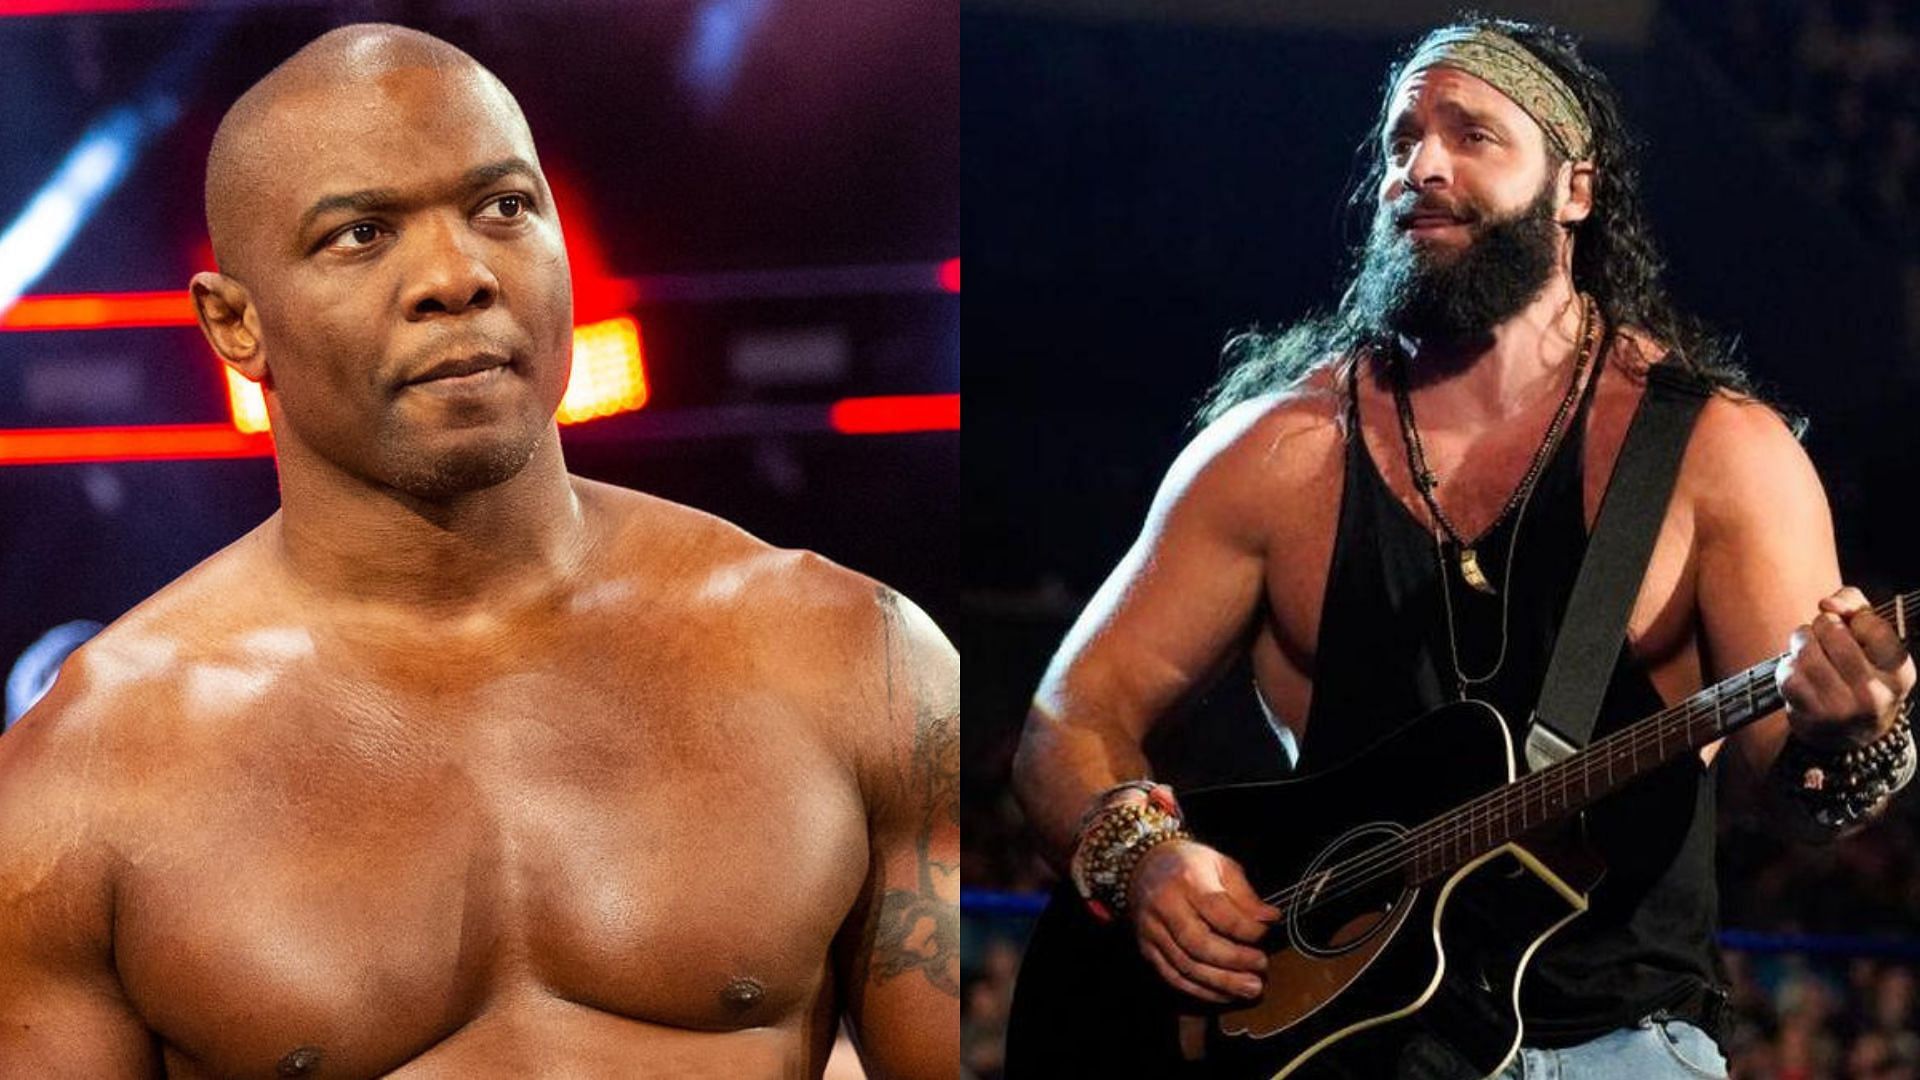 Shelton Benjamin and Elias were recently released from WWE